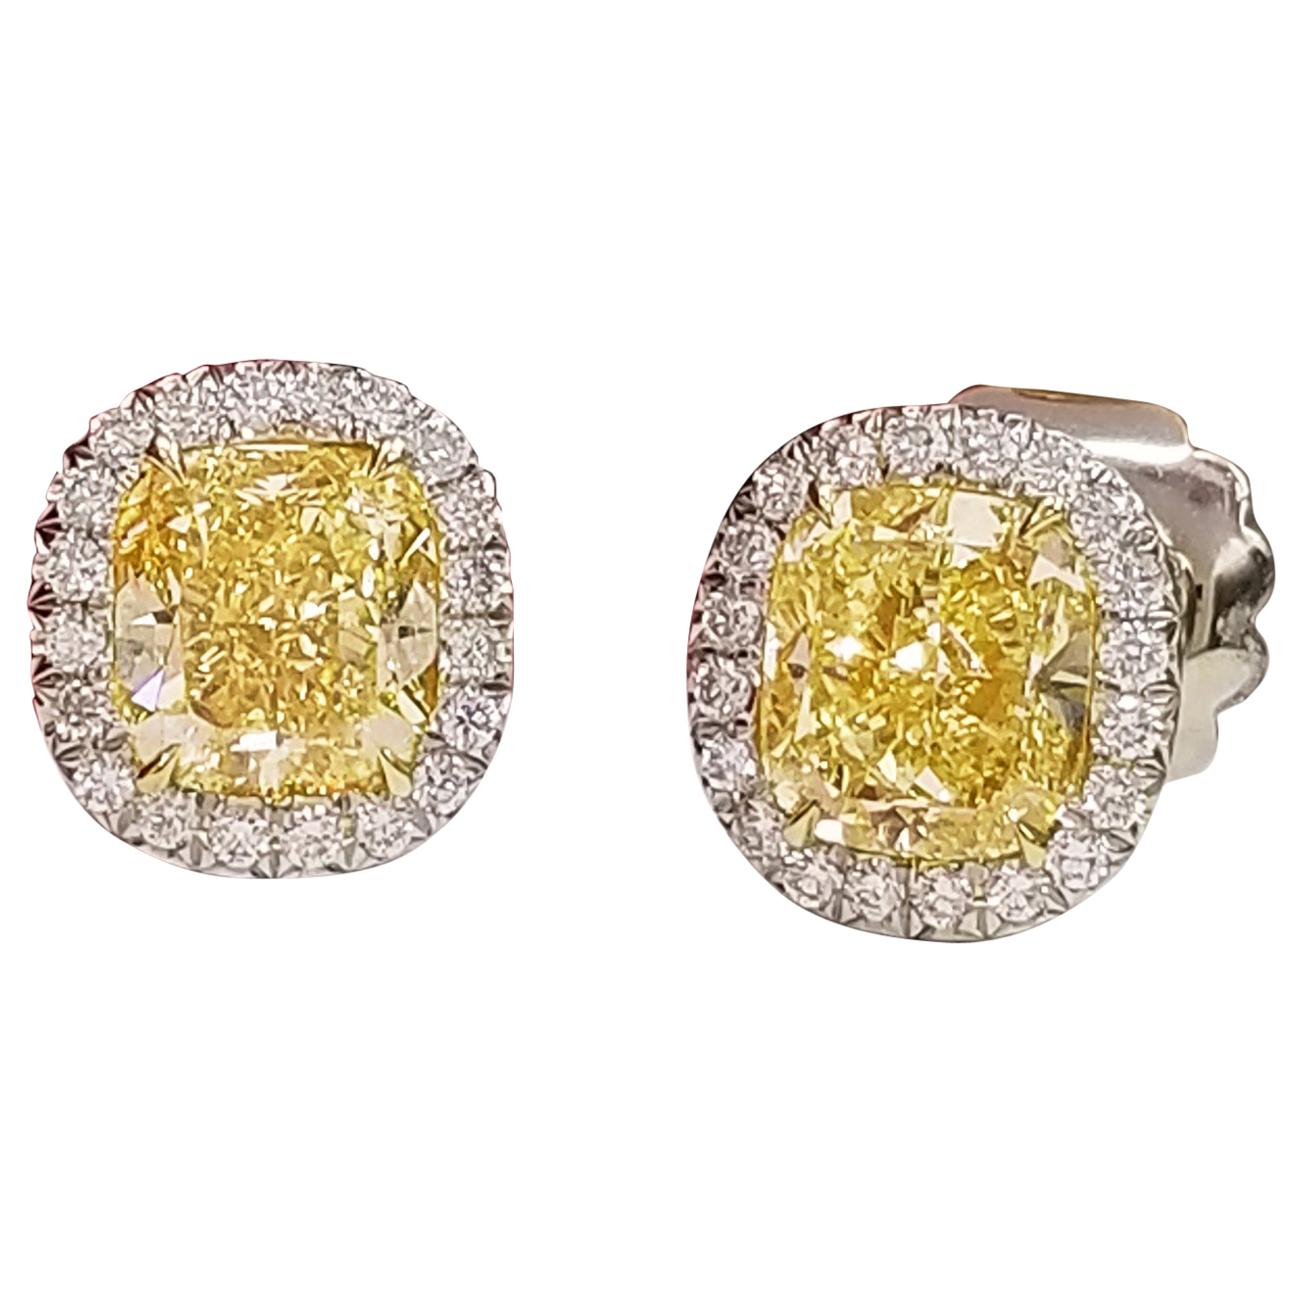 Scarselli Stud Platinum Earrings with 2 Carat Fancy Yellow Diamond Each GIA